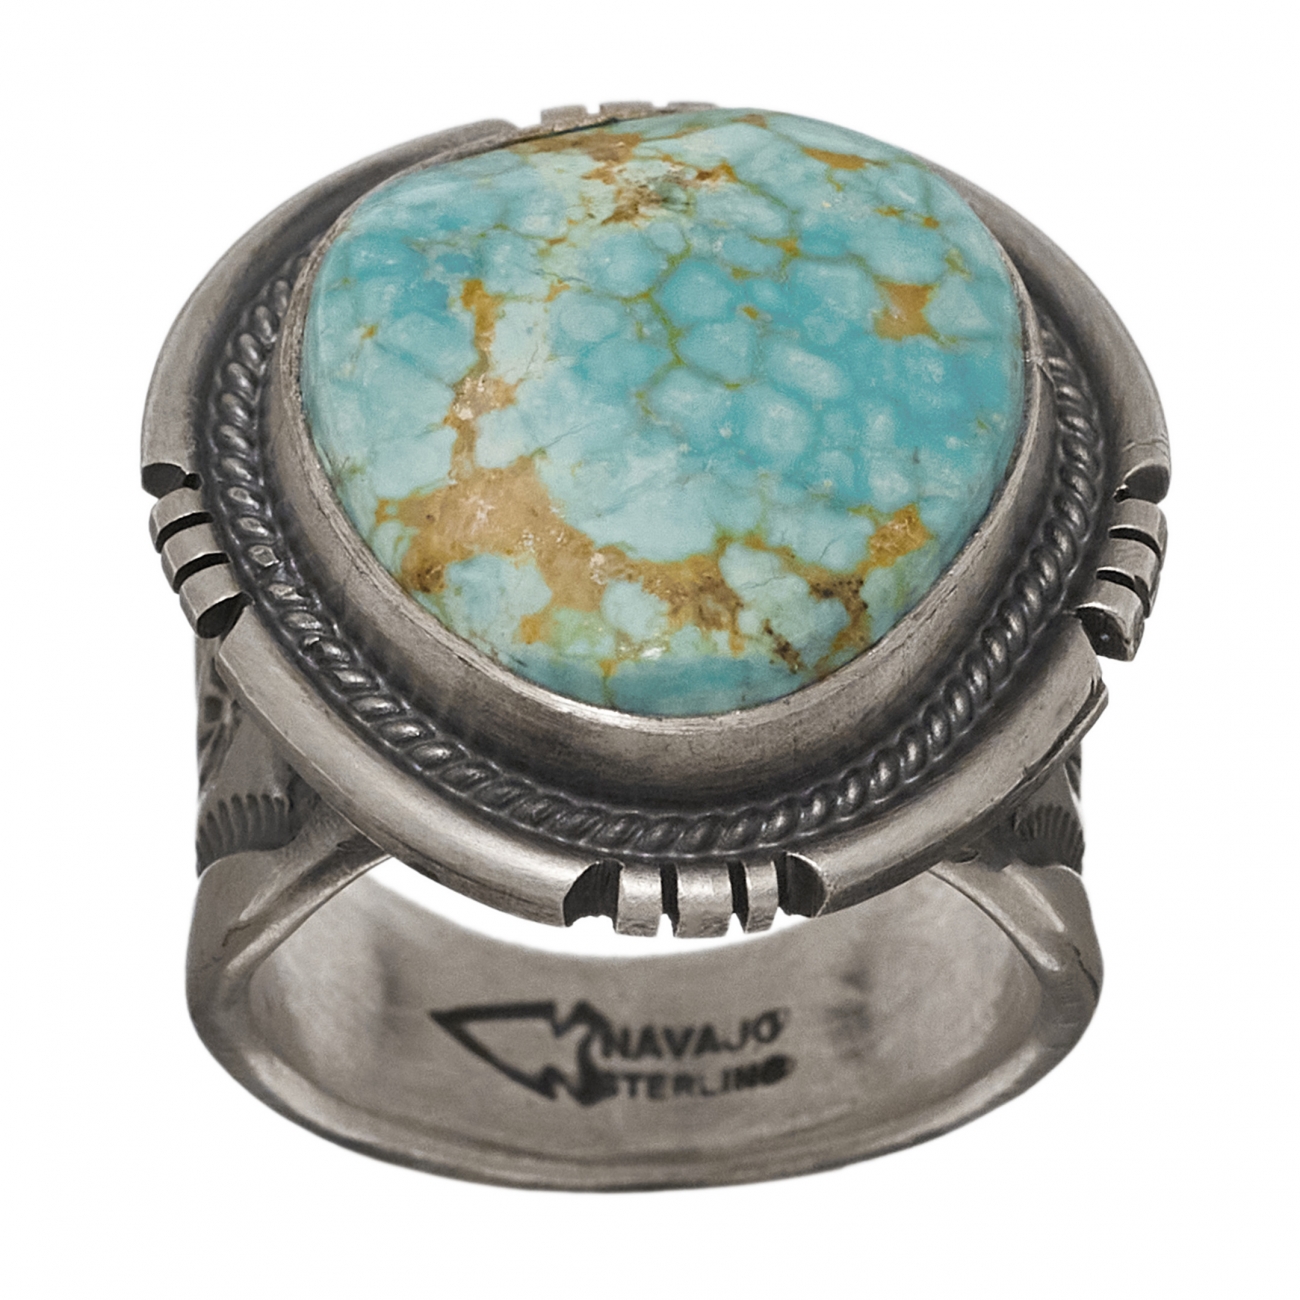 Navajo ring for men BA1244 in turquoise and silver - Harpo Paris